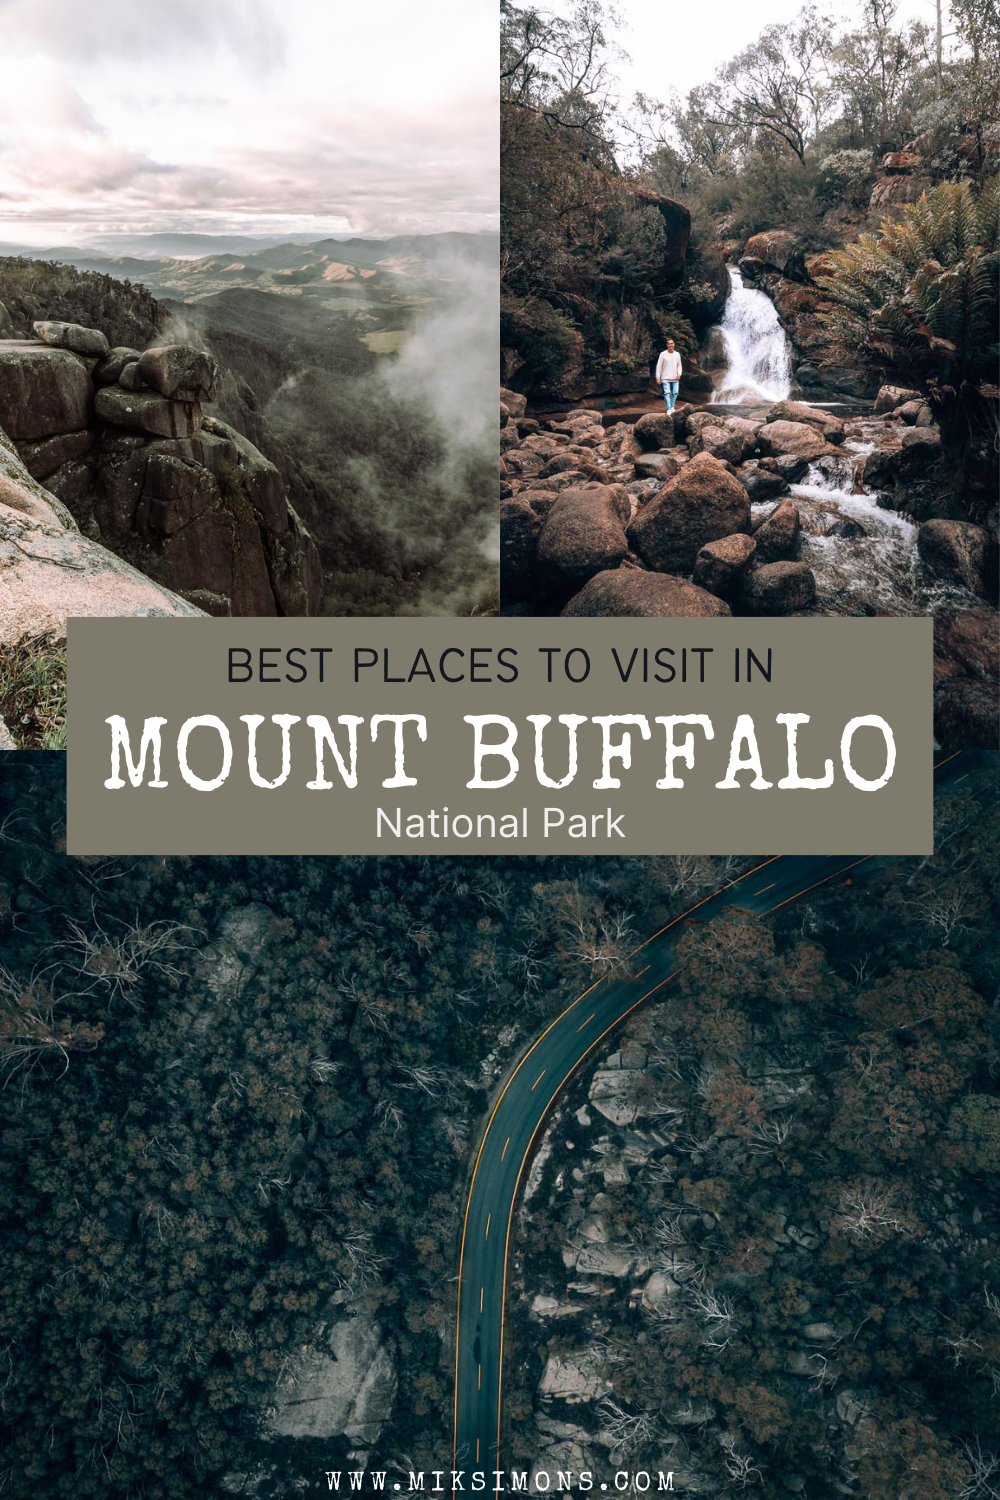 Best places to visit in Mount Buffalo National Park3